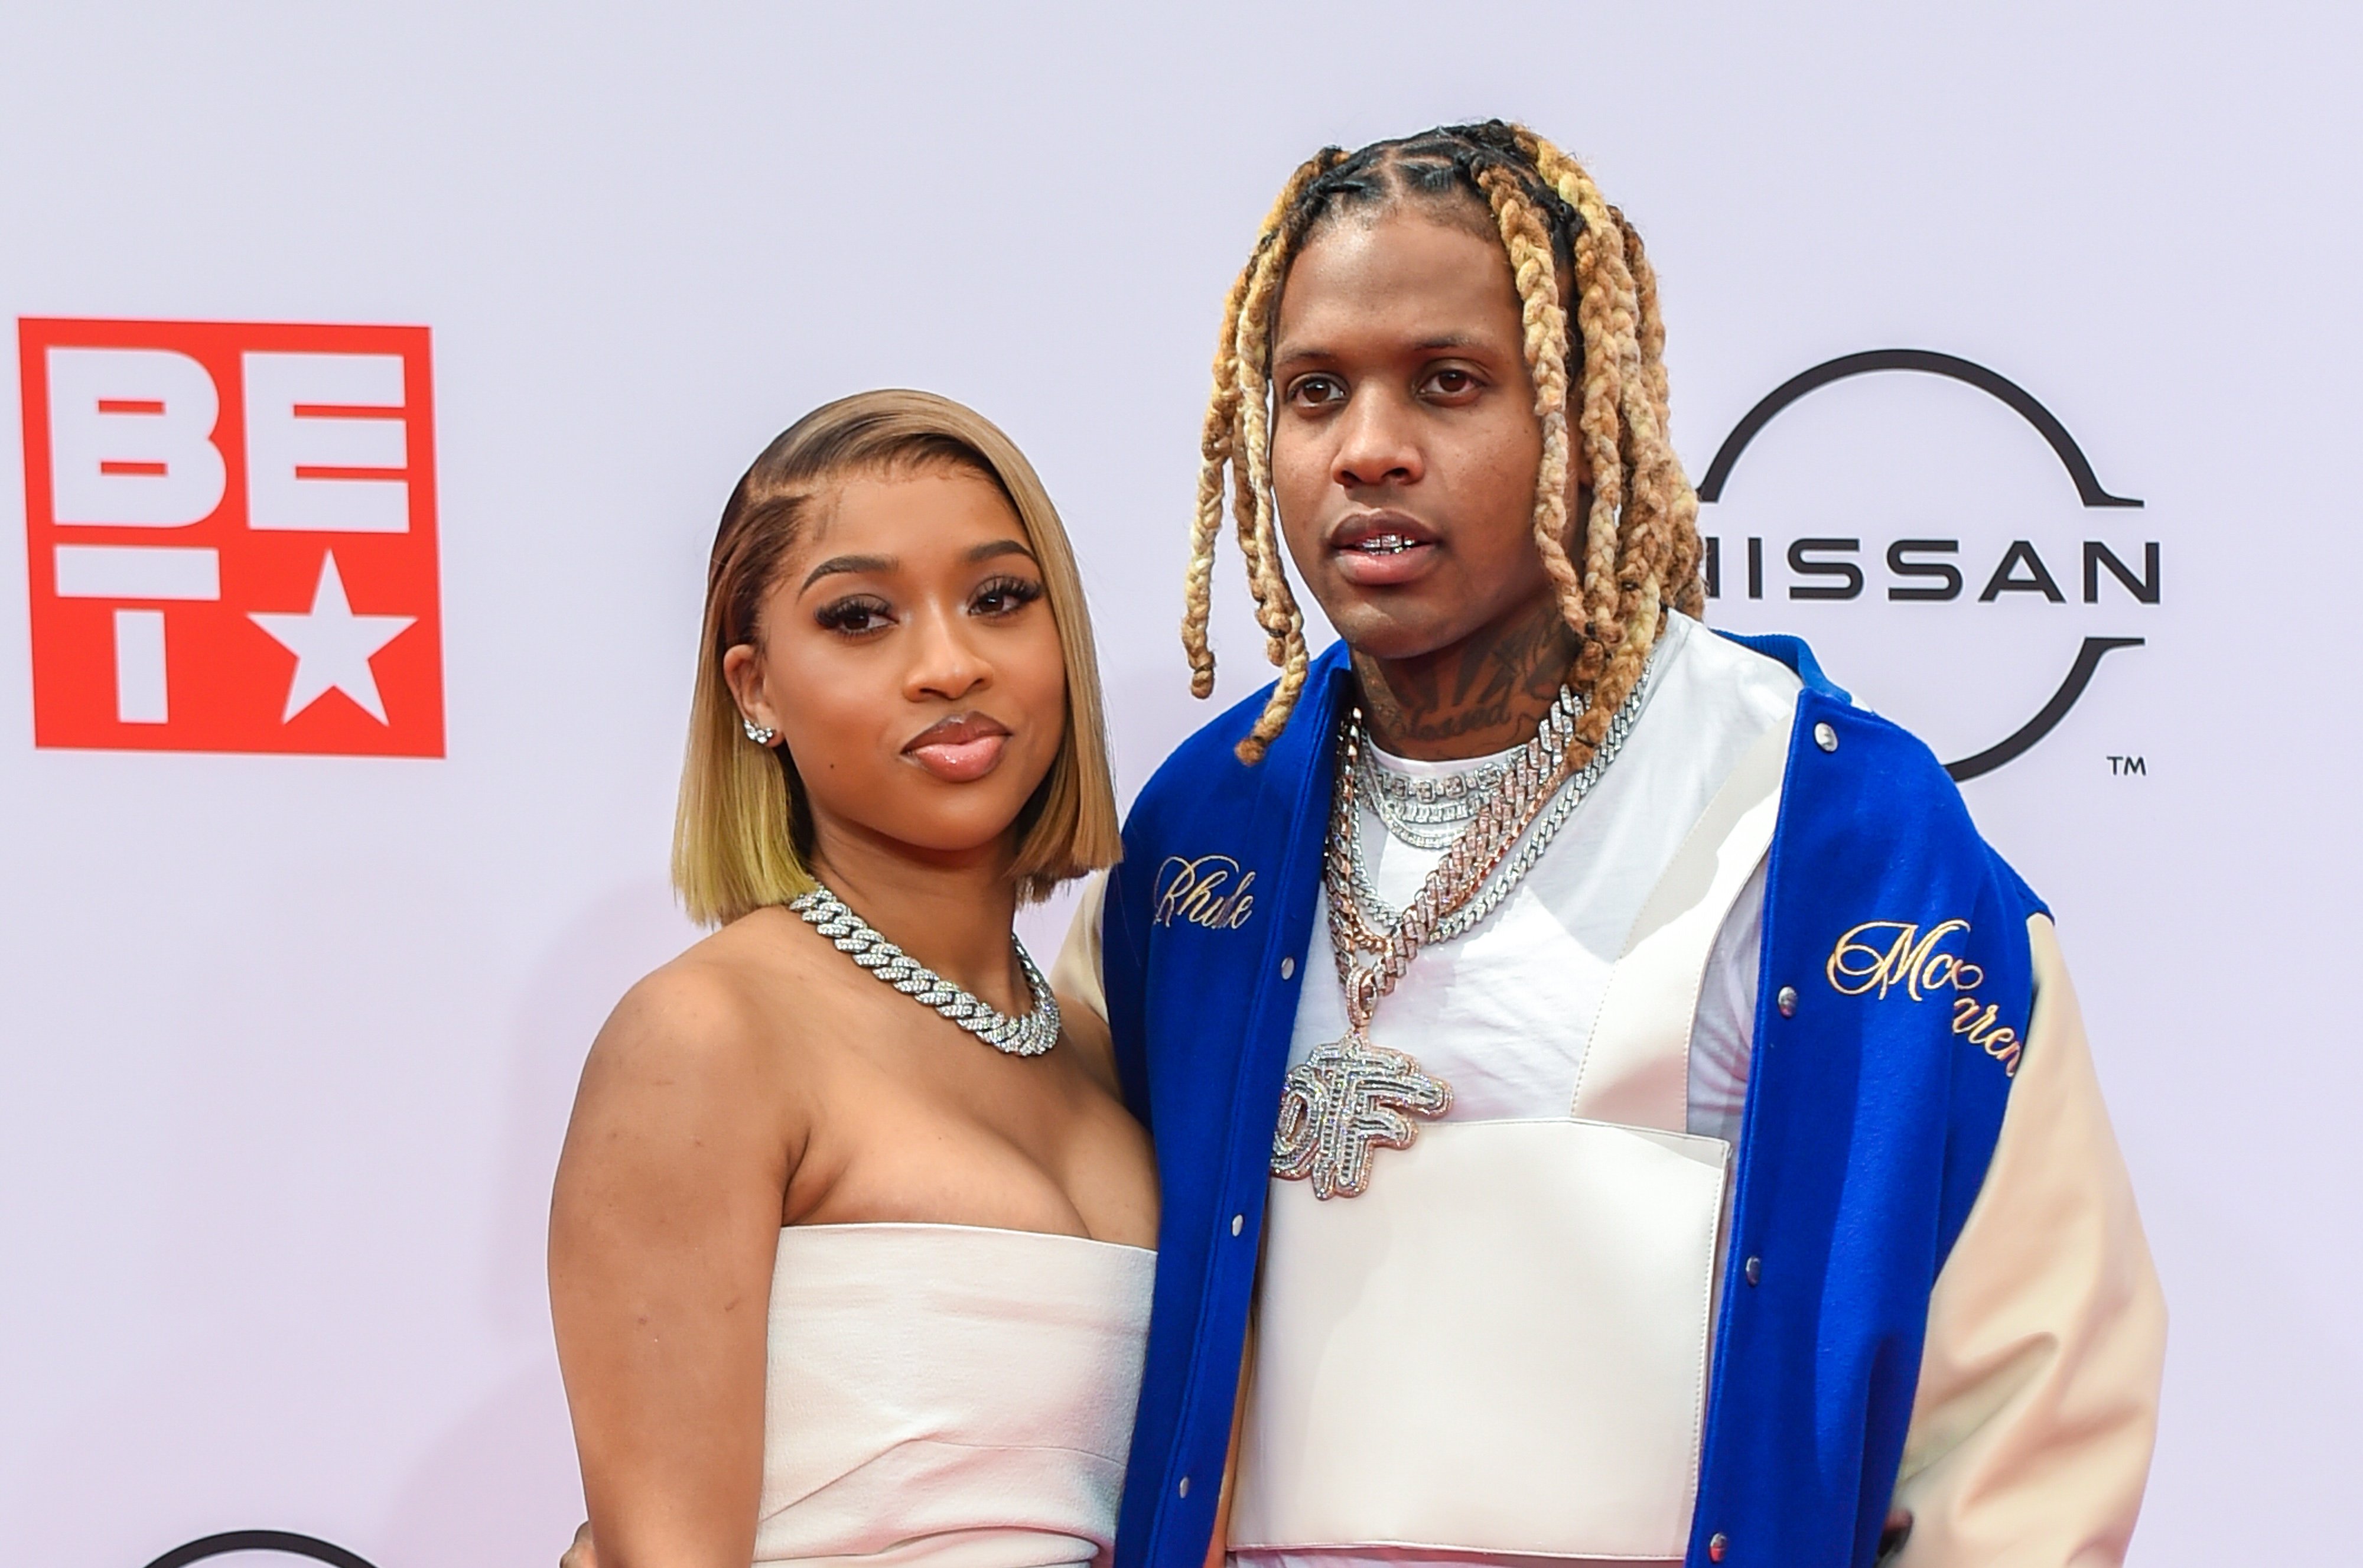 Lil Durk and India Royale pose at the the 2021 BET Awards in Los Angeles | Source: Getty Images